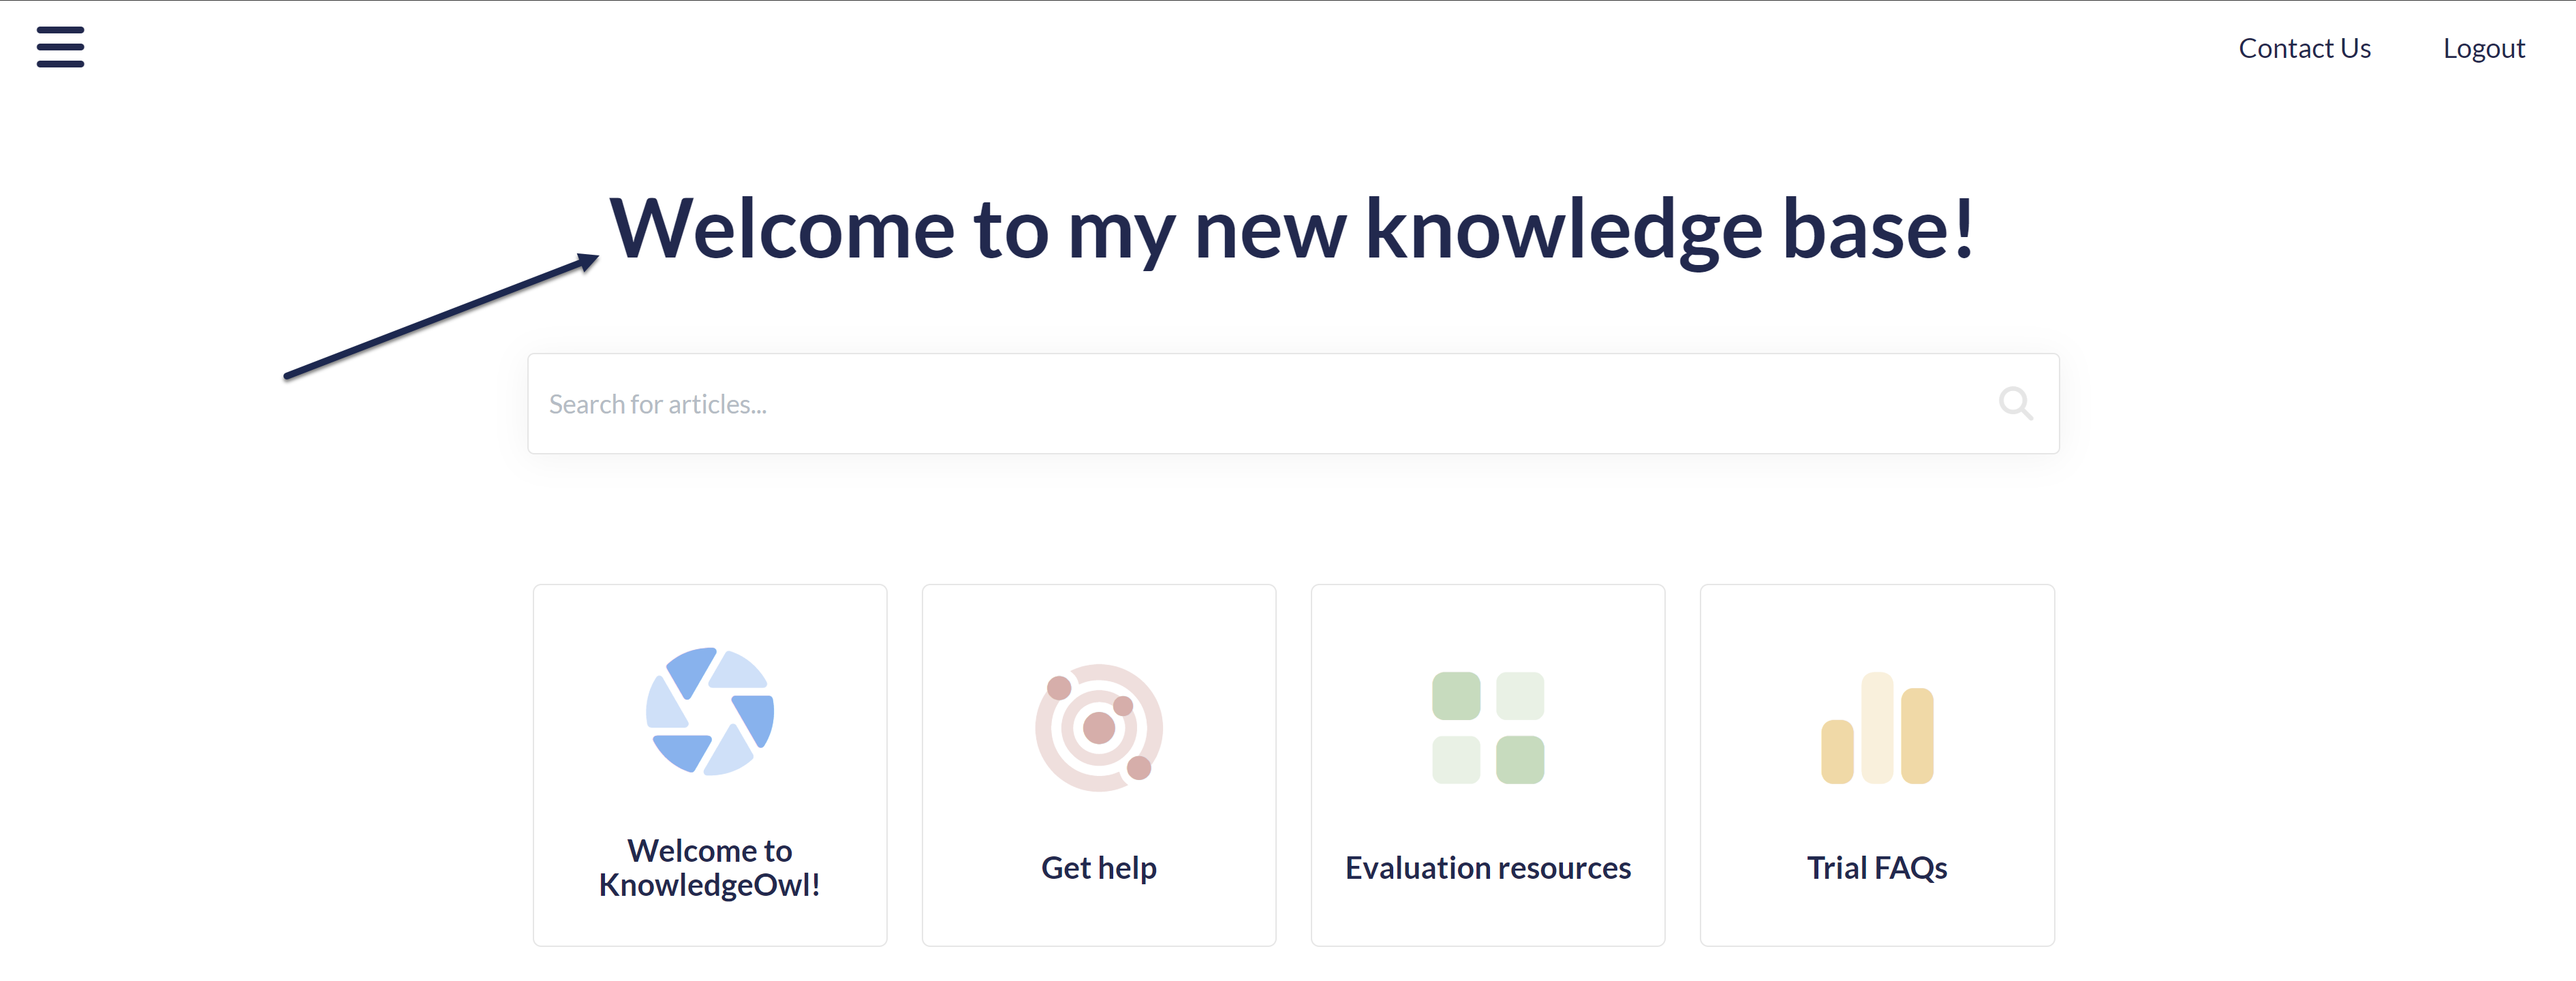 The homepage of a live knowledge base. An arrow points to the 